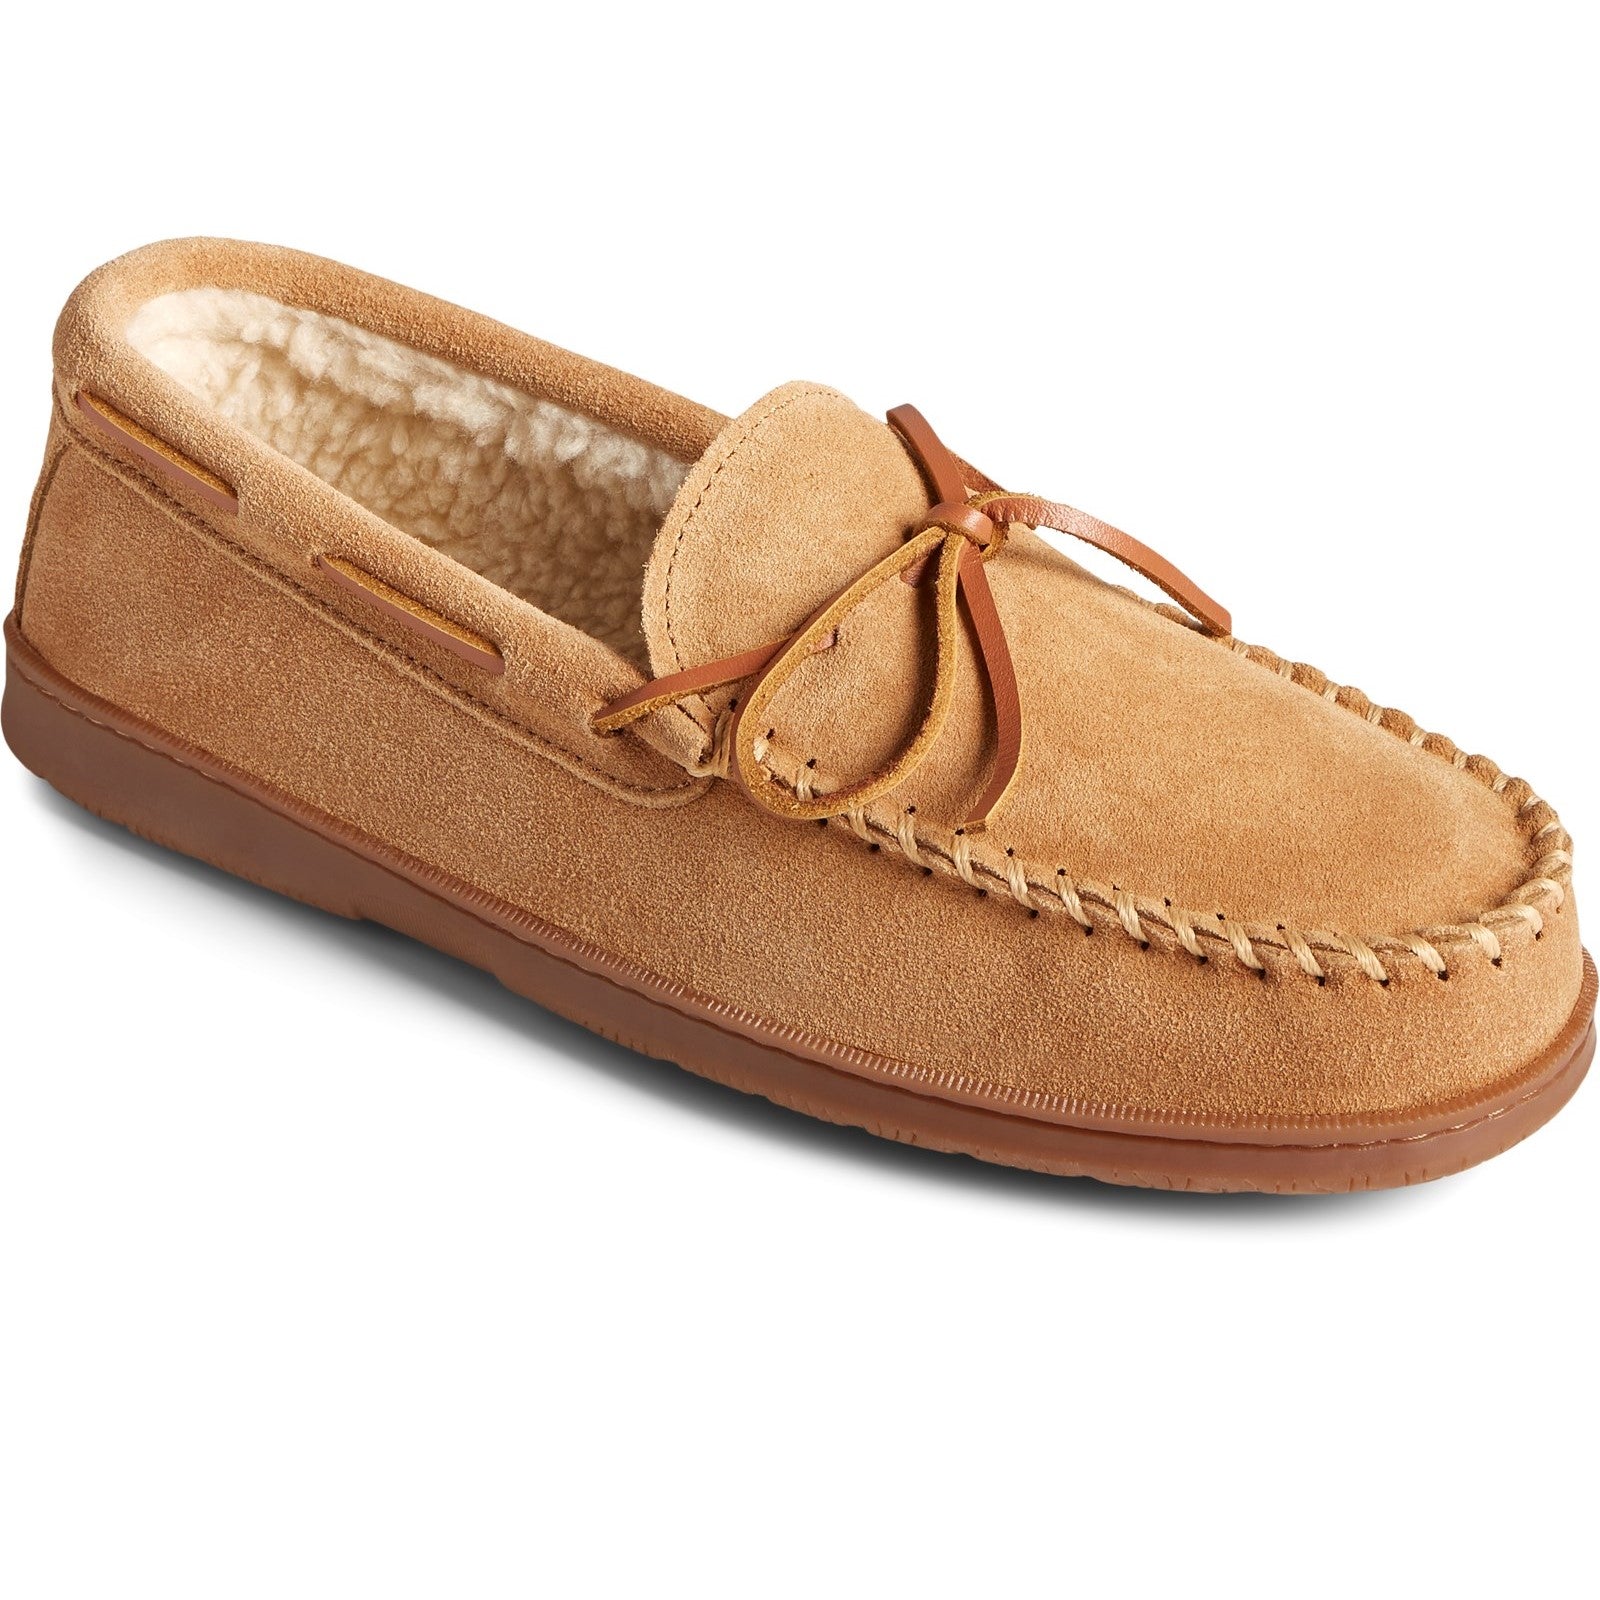 Sperry Mens Doyle Moccasin Slippers - Light Brown